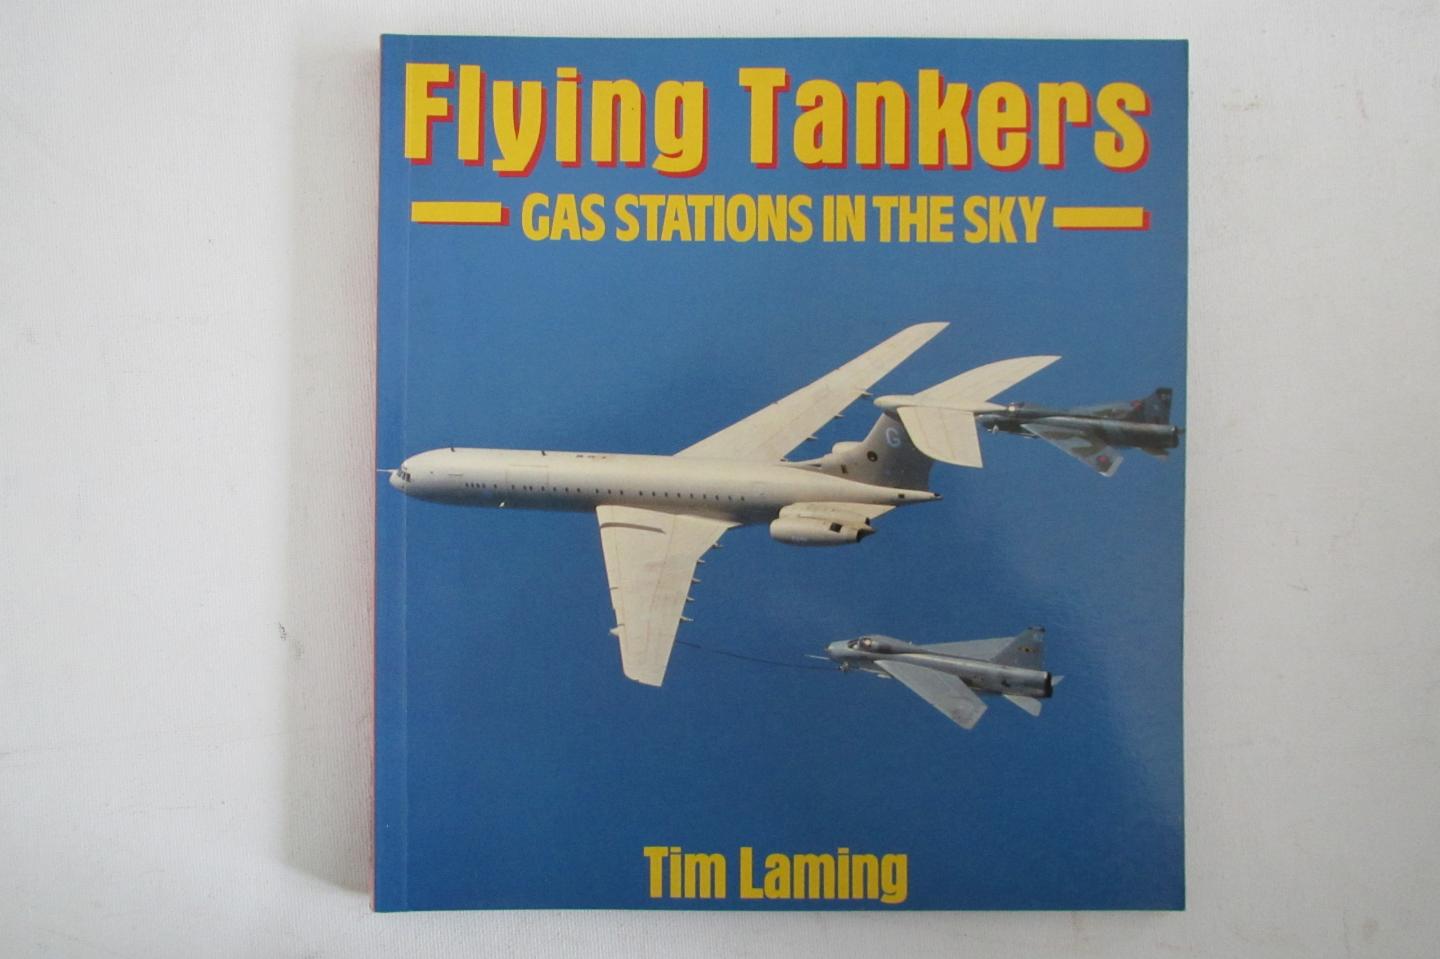 Tim Laming - Flying tankers - gas stations in the sky